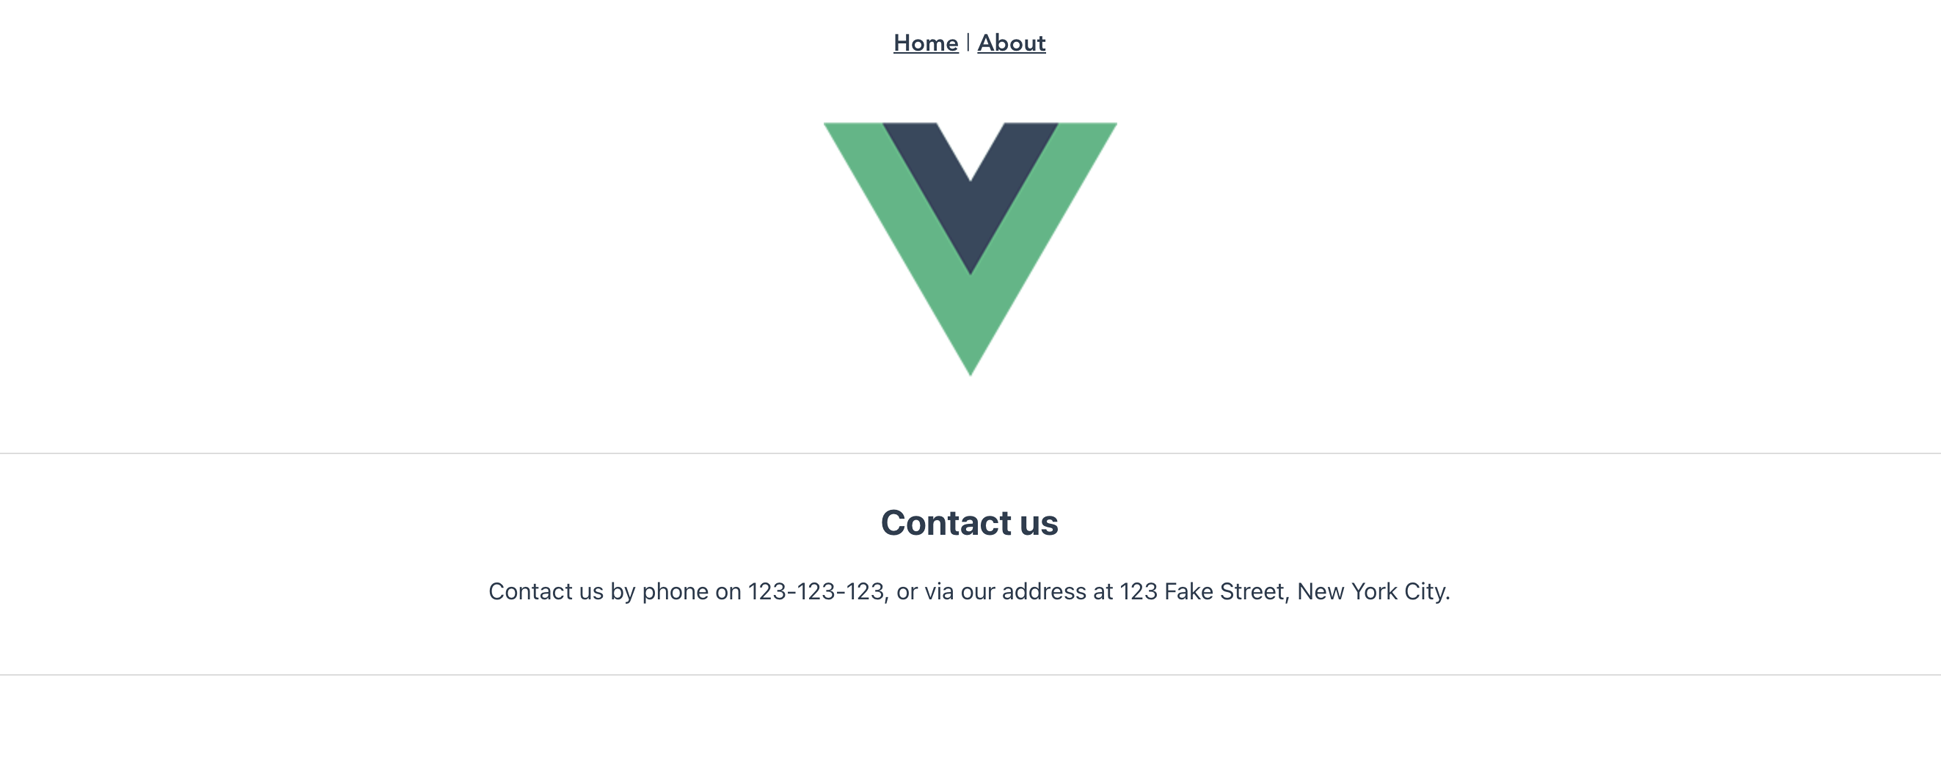 Creating a new page in your first vue app